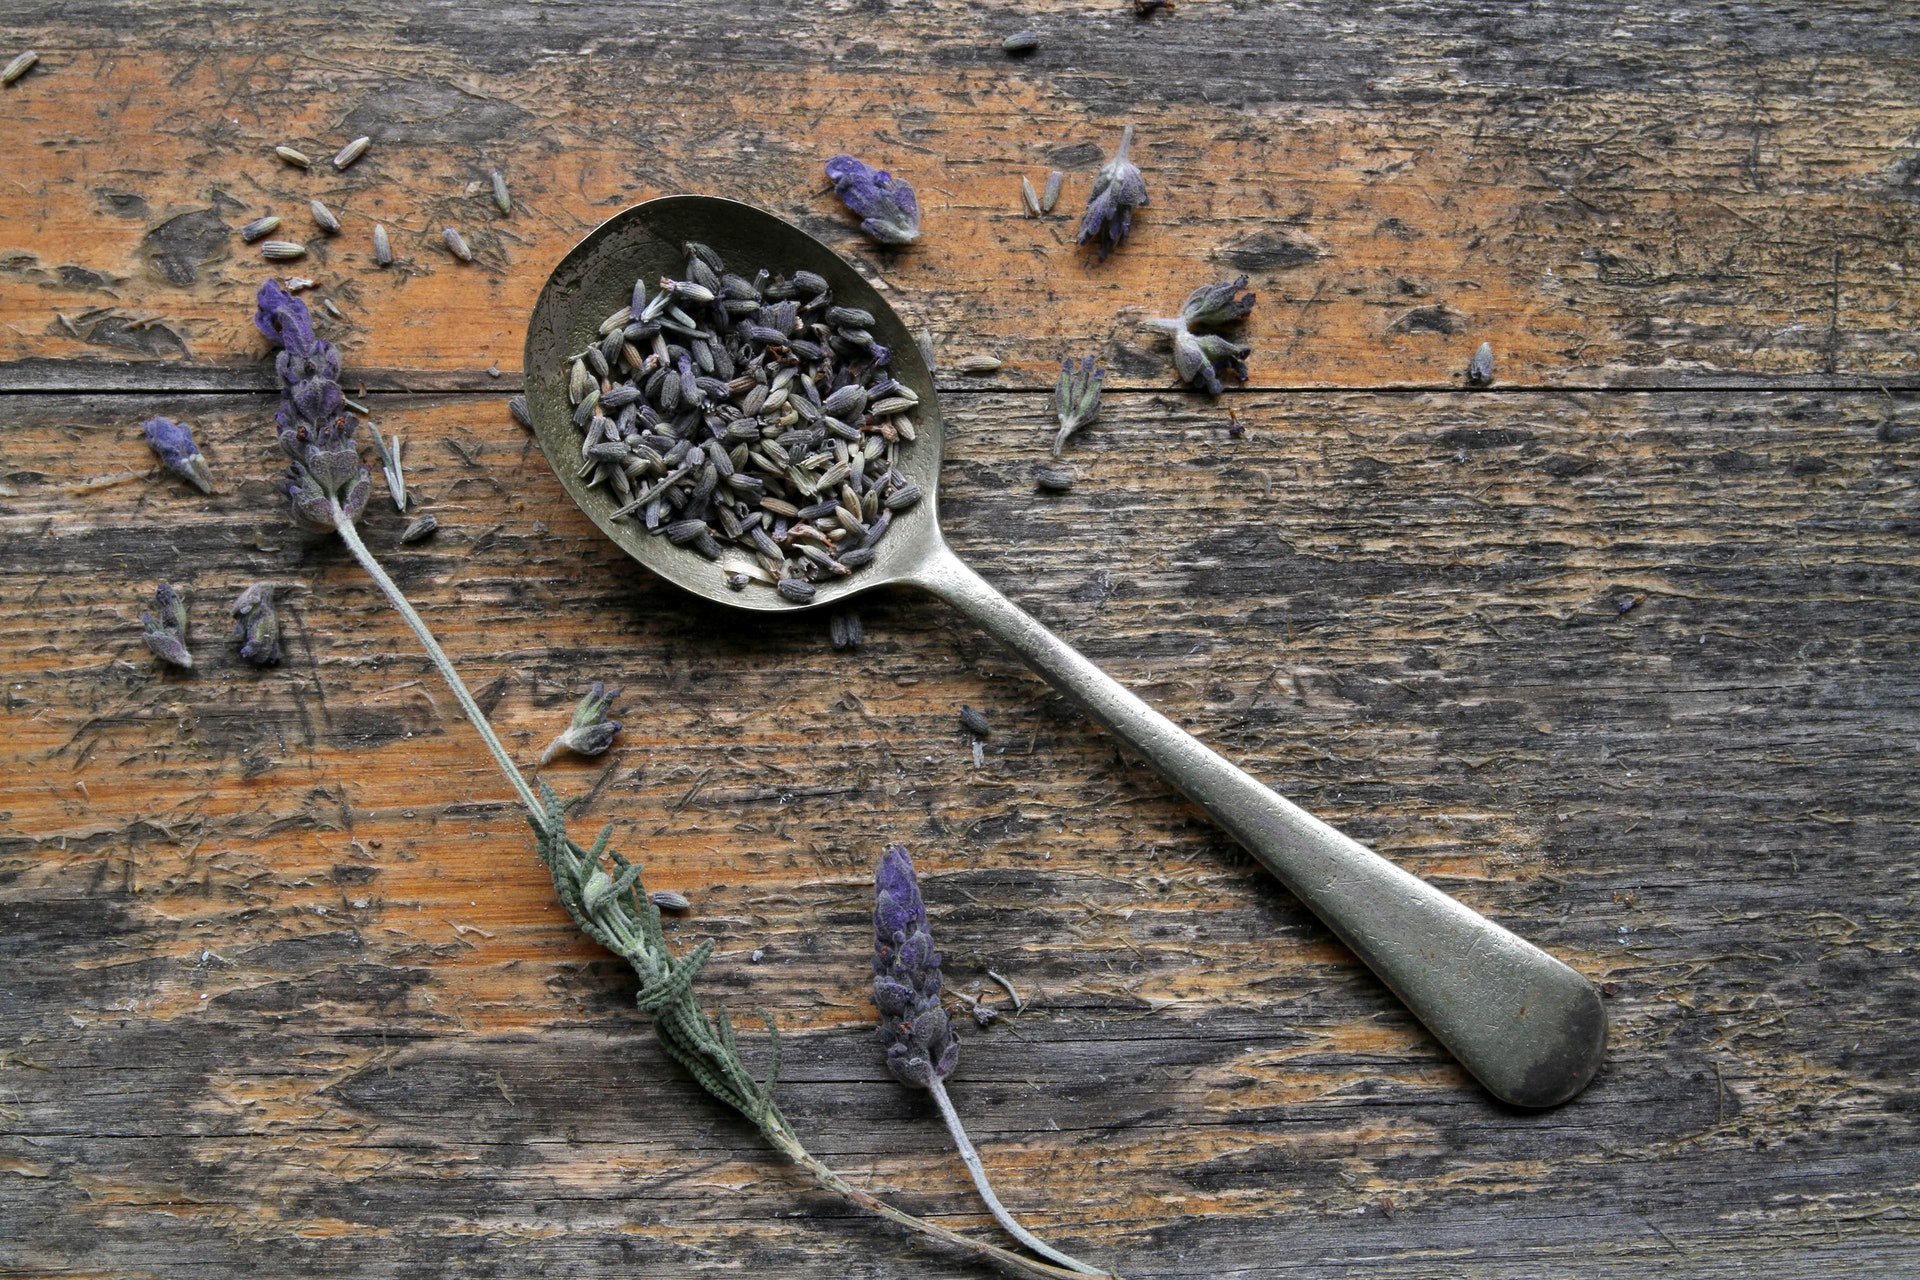 A stalk of lavender on a wooden table beside a spoon of dried lavender flowers